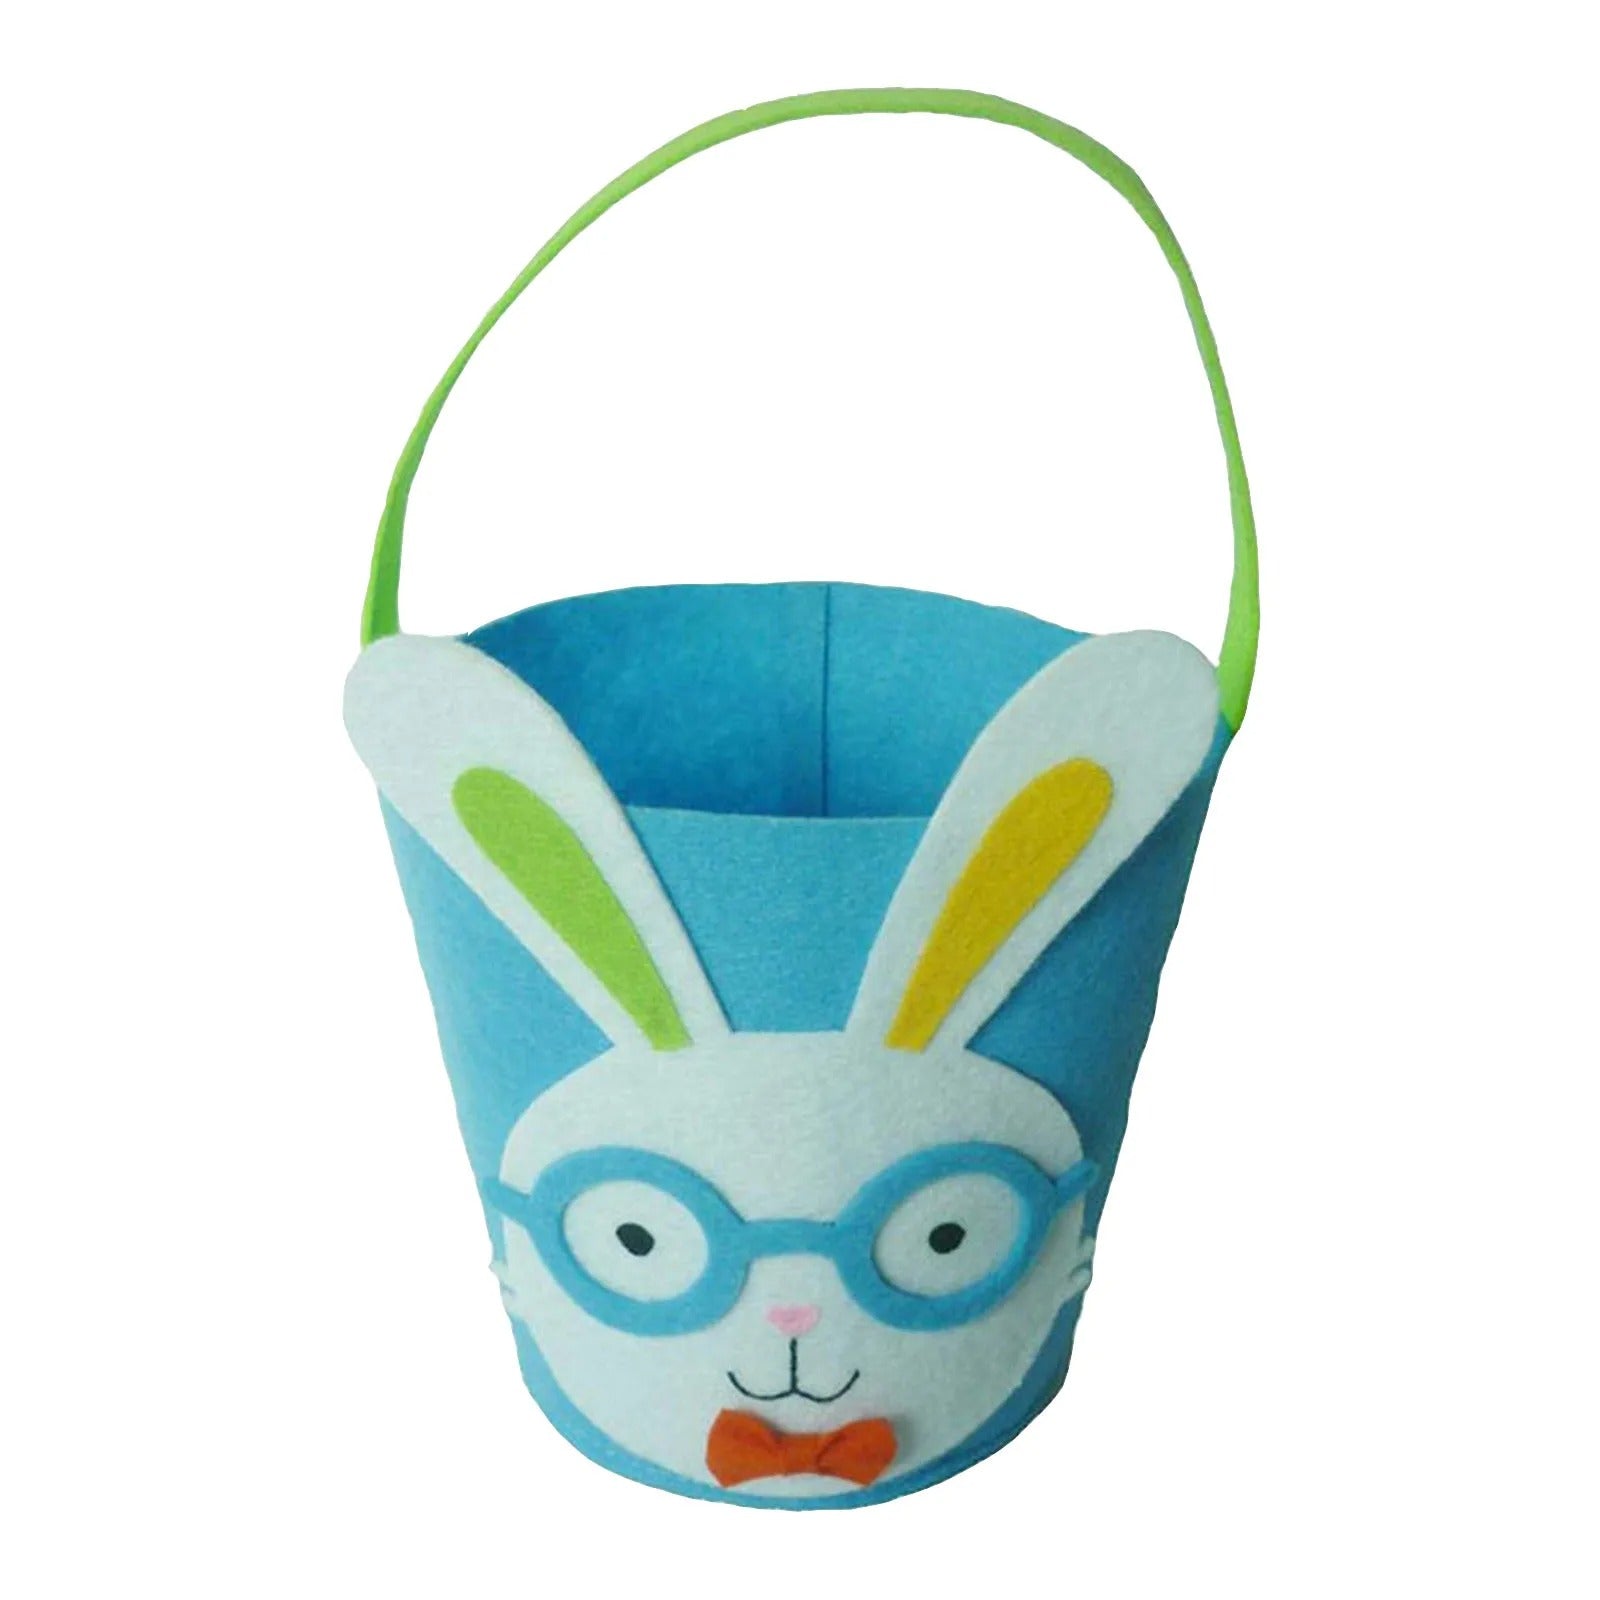 Cute Easter Rabbit Cloth Basket Candy Eggs Buckets Party Decoration For Kids Gift Boxes & Bags